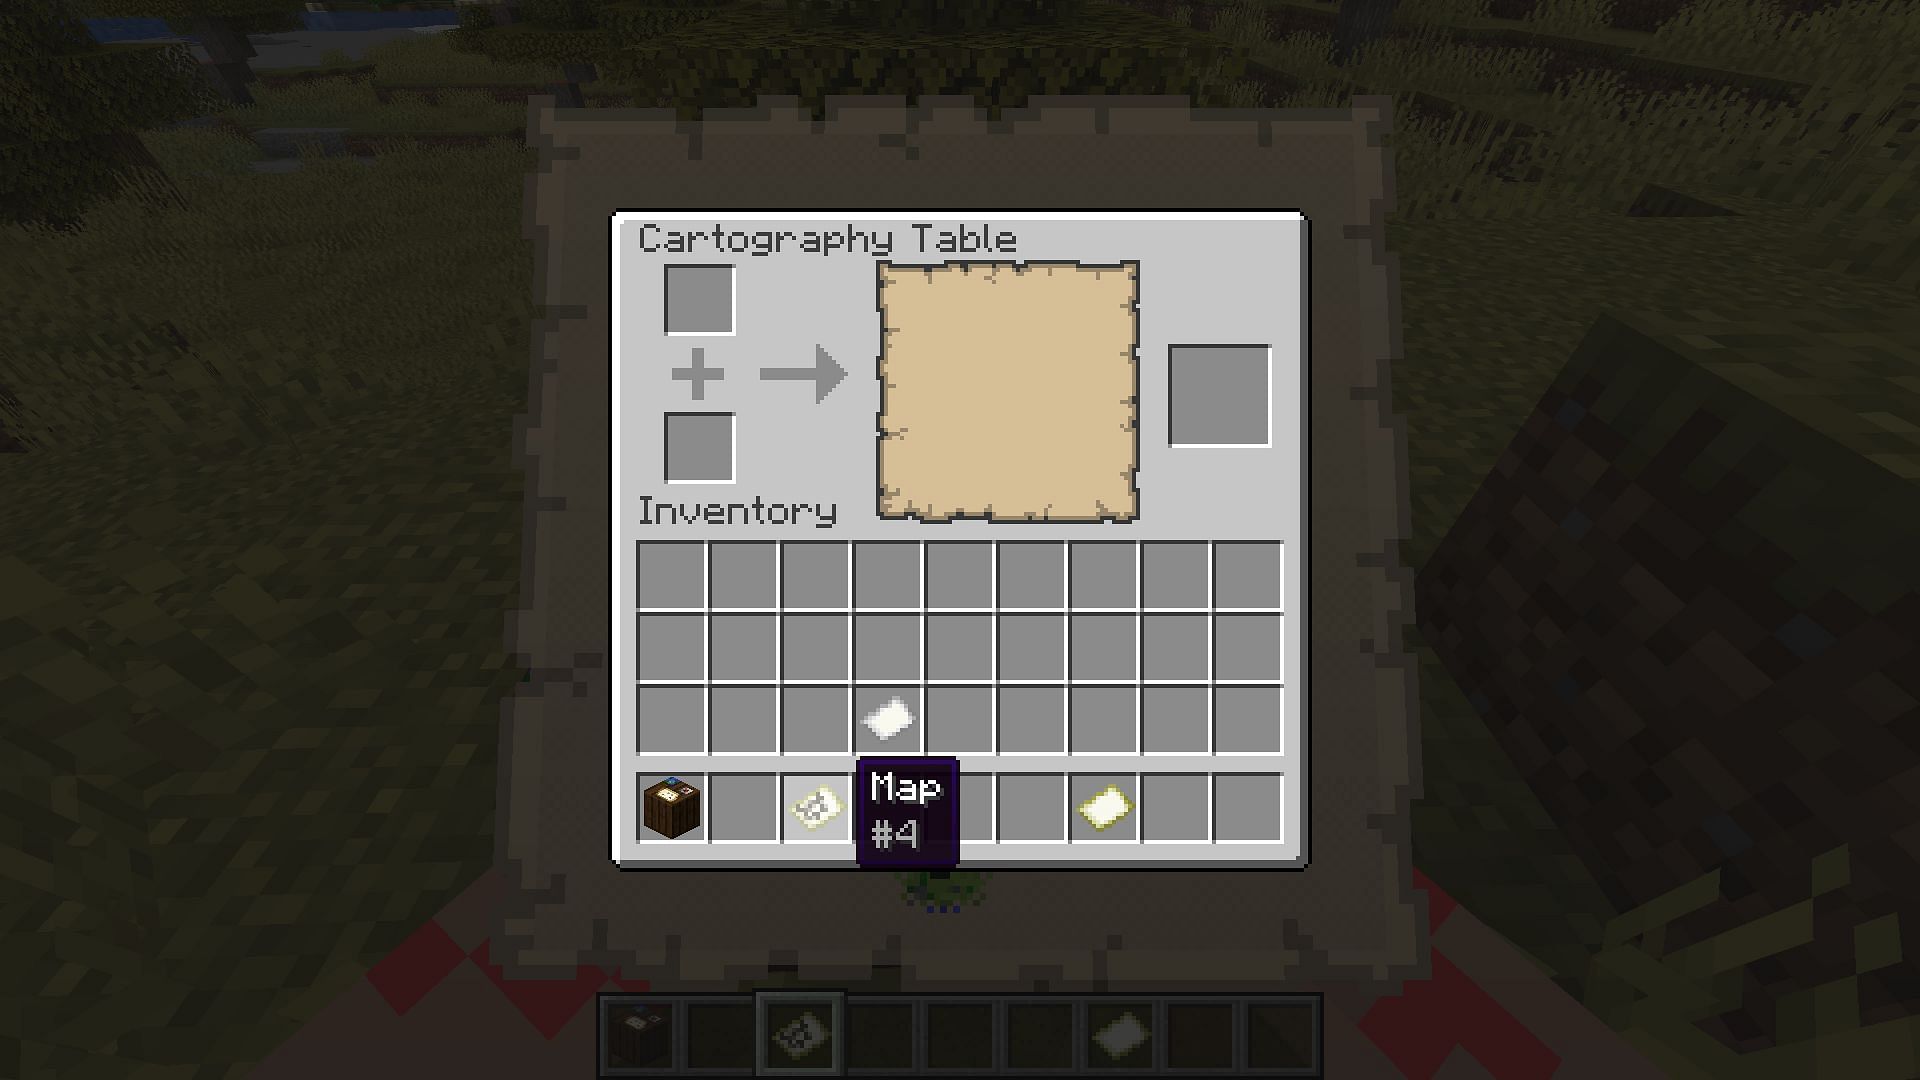 Cartography table interface (Image via Minecraft)